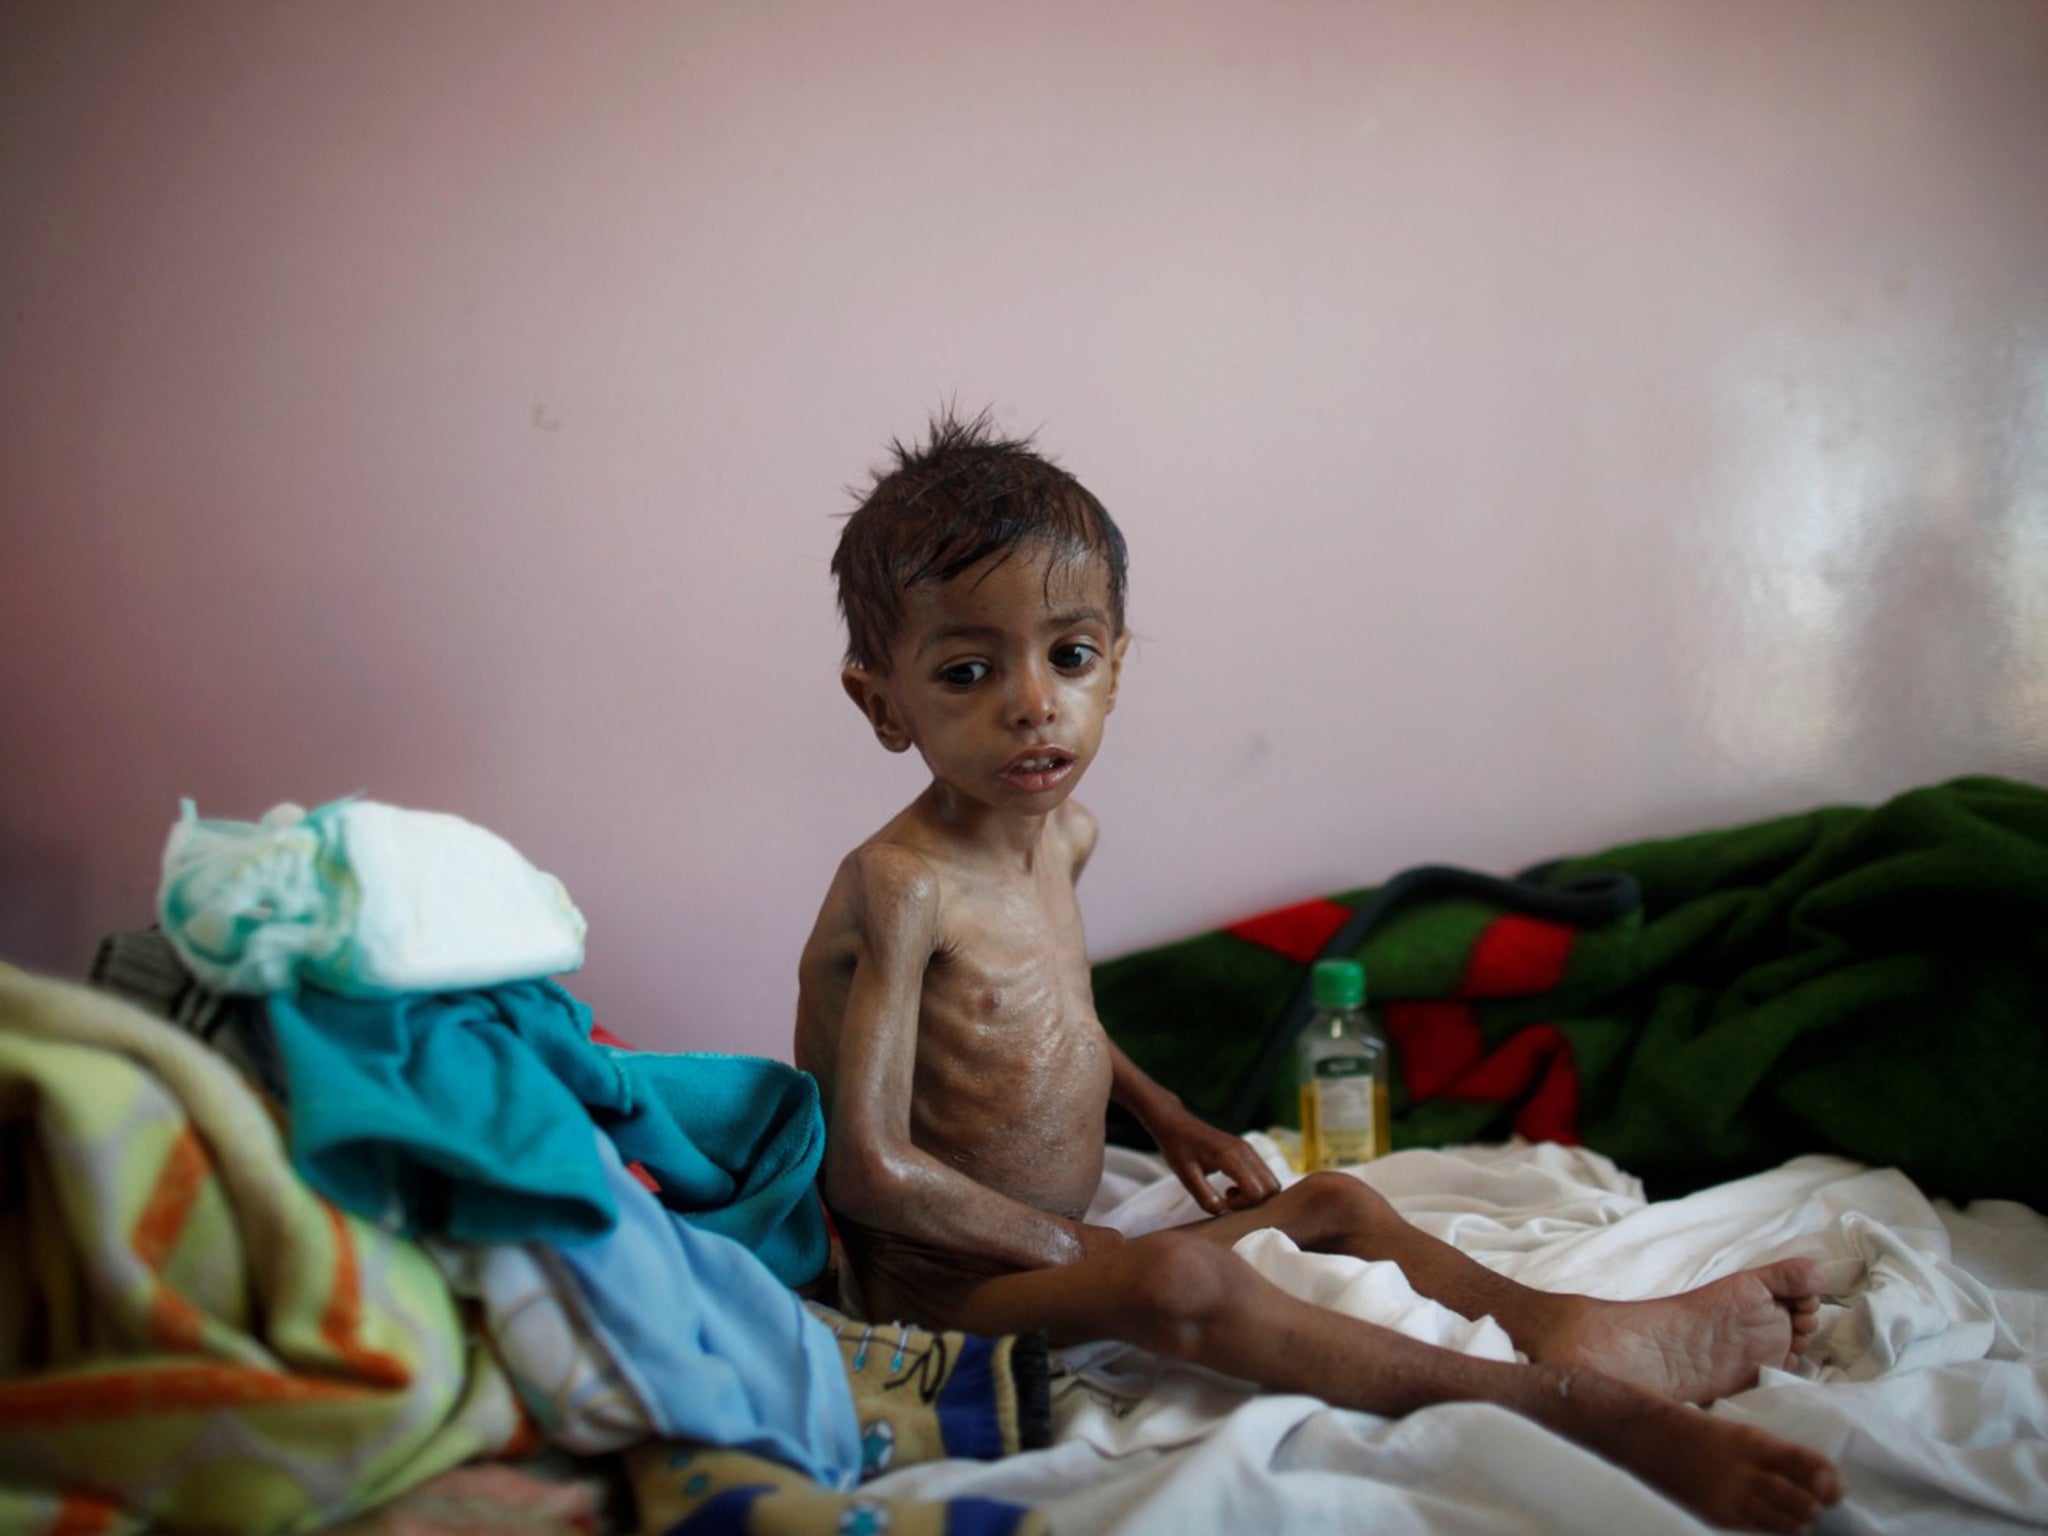 The UN says more than 370,000 children are at risk of starvation due to the war